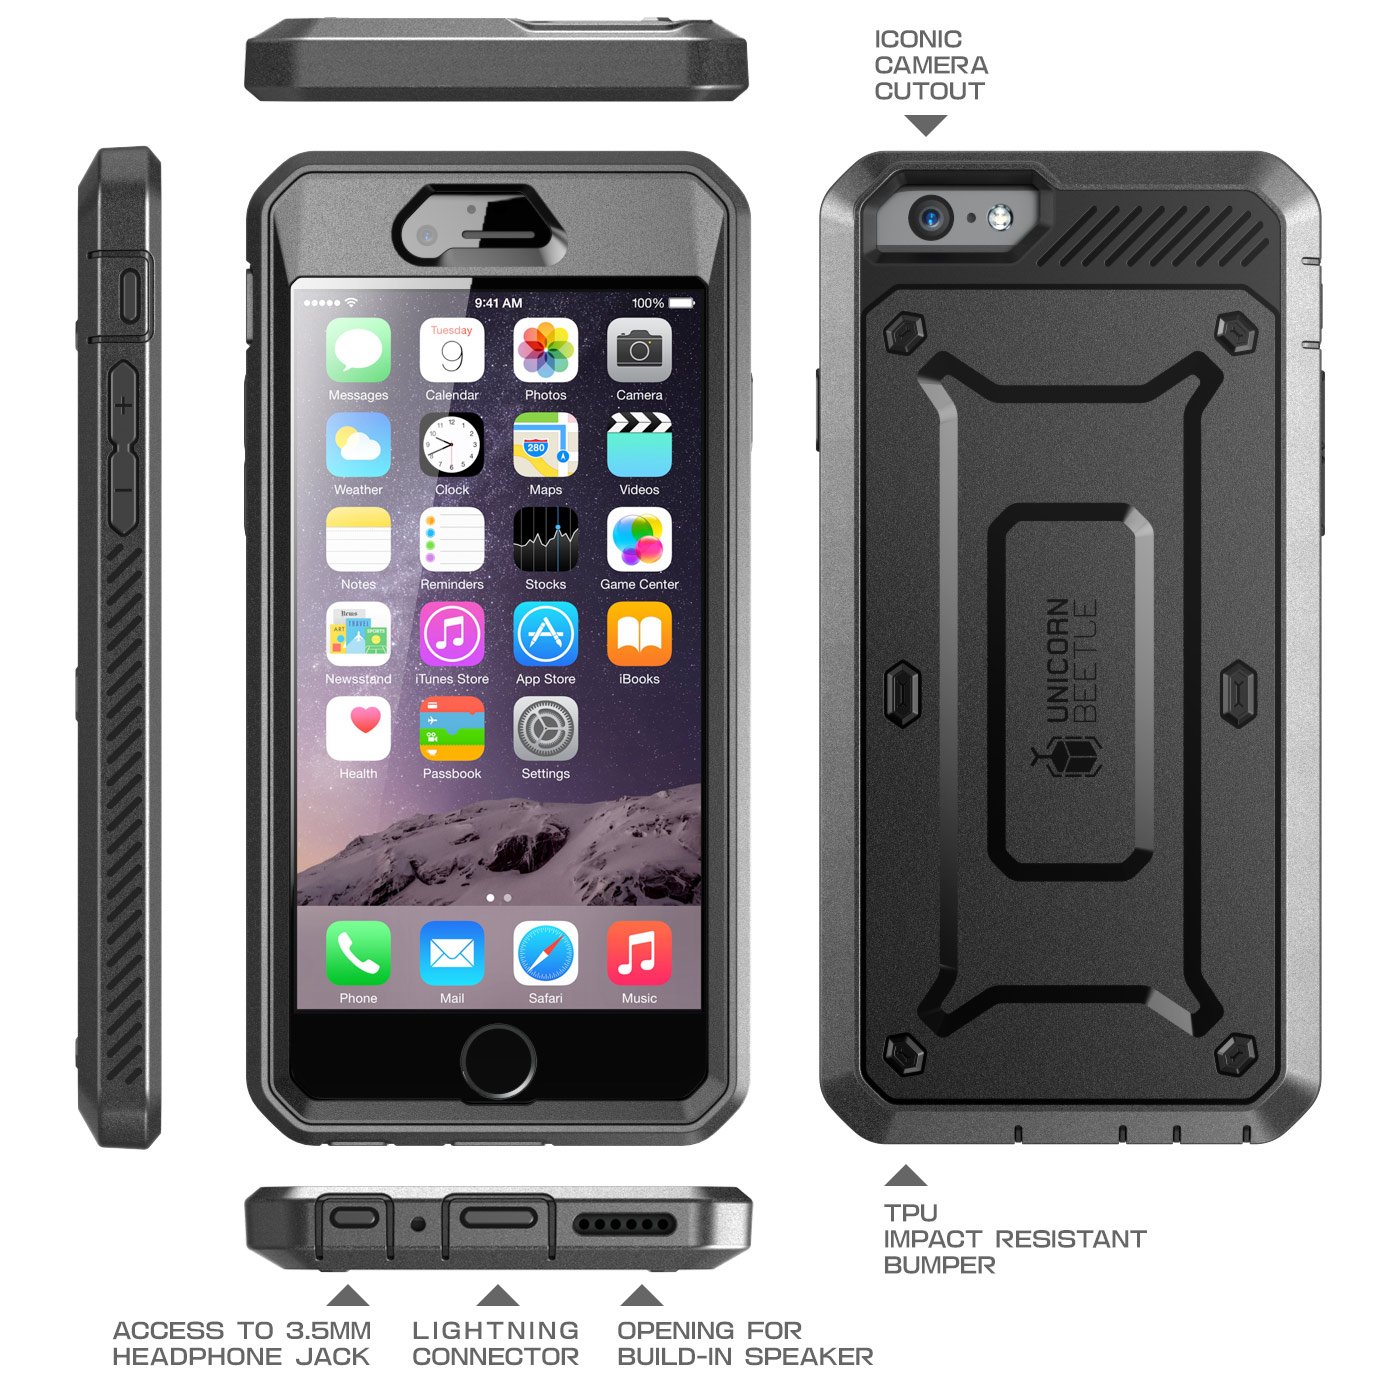 SUPCASE [Unicorn Beetle Pro] Case Designed for iPhone 6S, with Built-In Screen Protector Rugged Holster Cover for Apple IPhone 6 Case / 6S 4.7 Inch display (Black/Black)